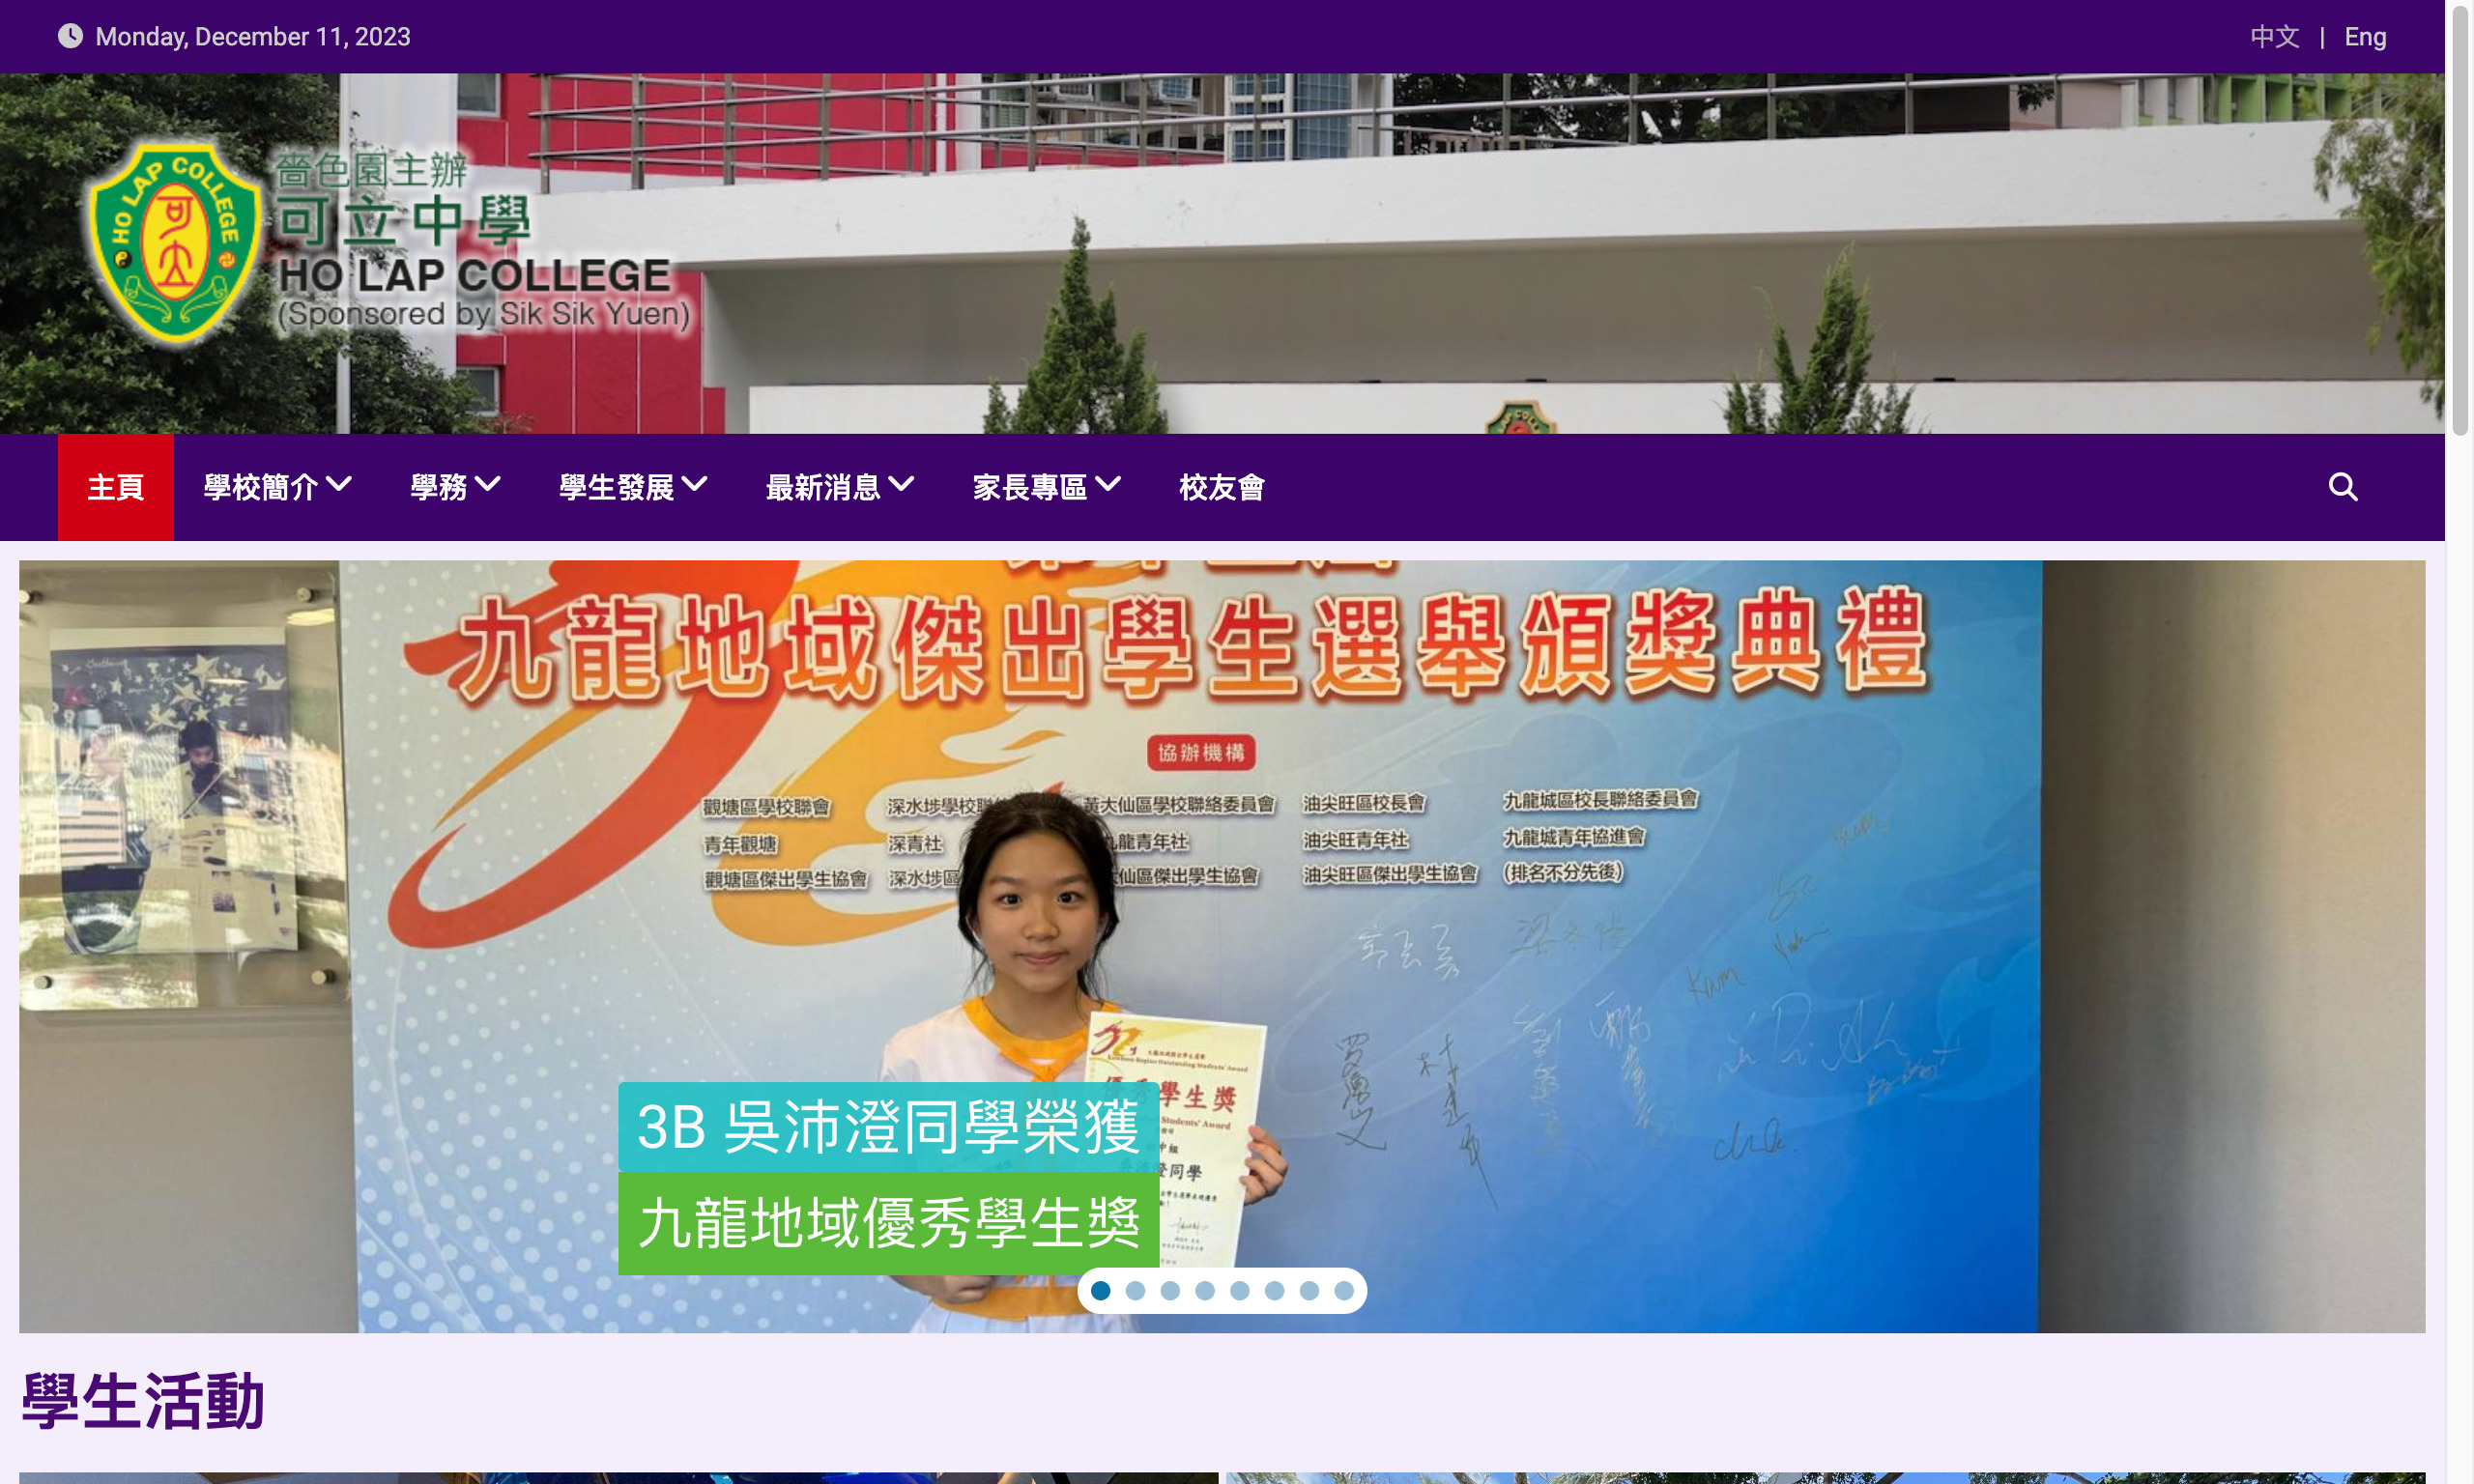 Screenshot of the Home Page of Ho Lap College (Sponsored by the Sik Sik Yuen)